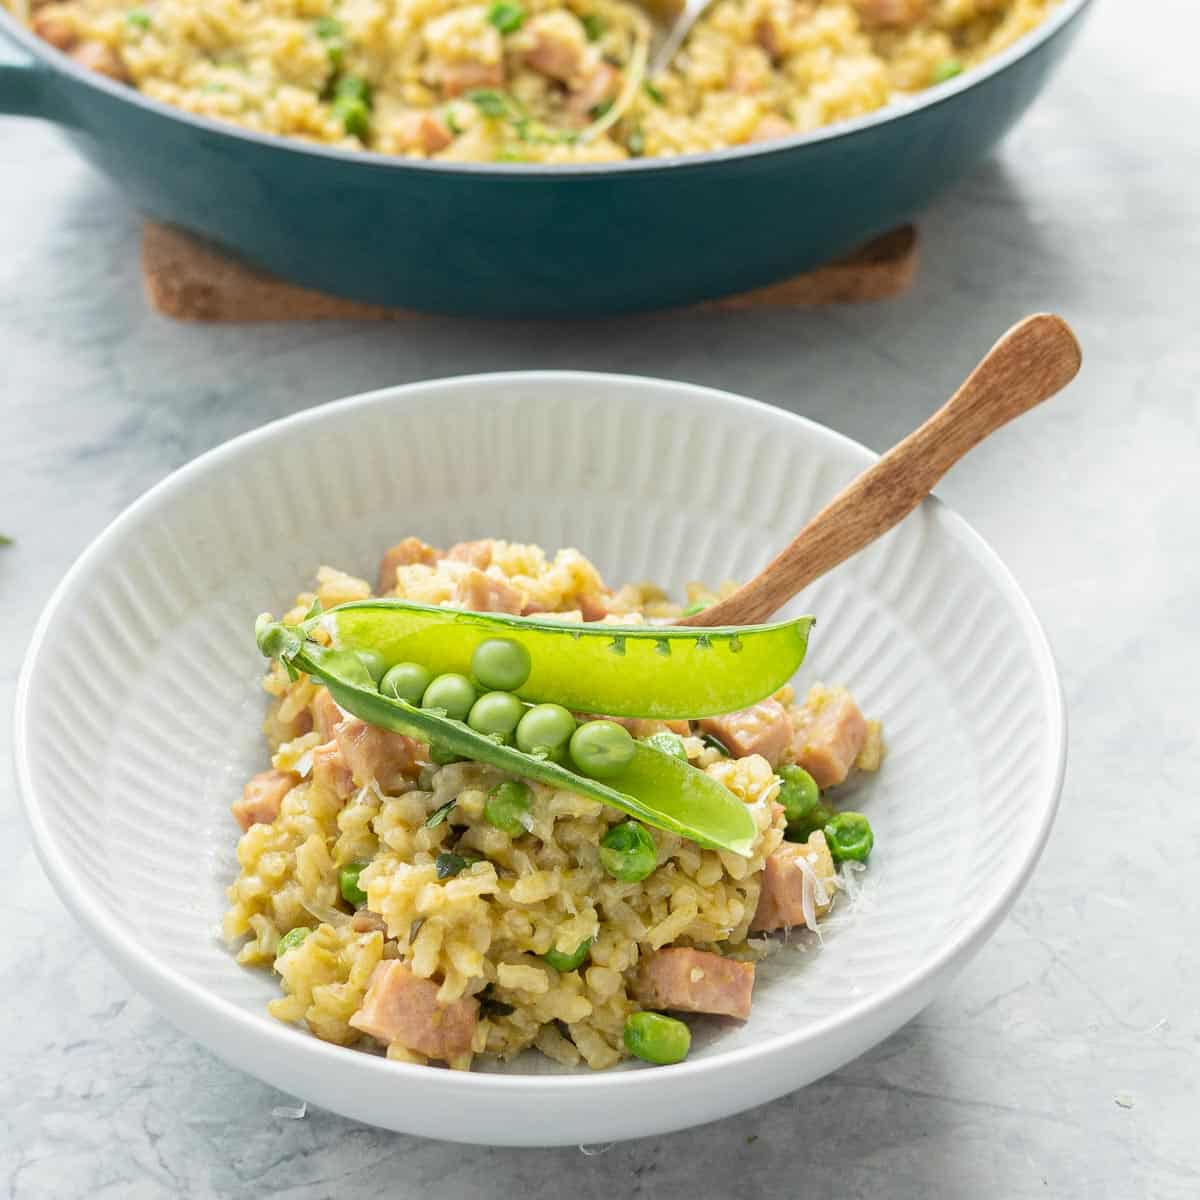 A bowl of kakhki green risotto studded with green peas and chunks of pink ham in a ceramic bowl with wooden spoon topped with a pea pod